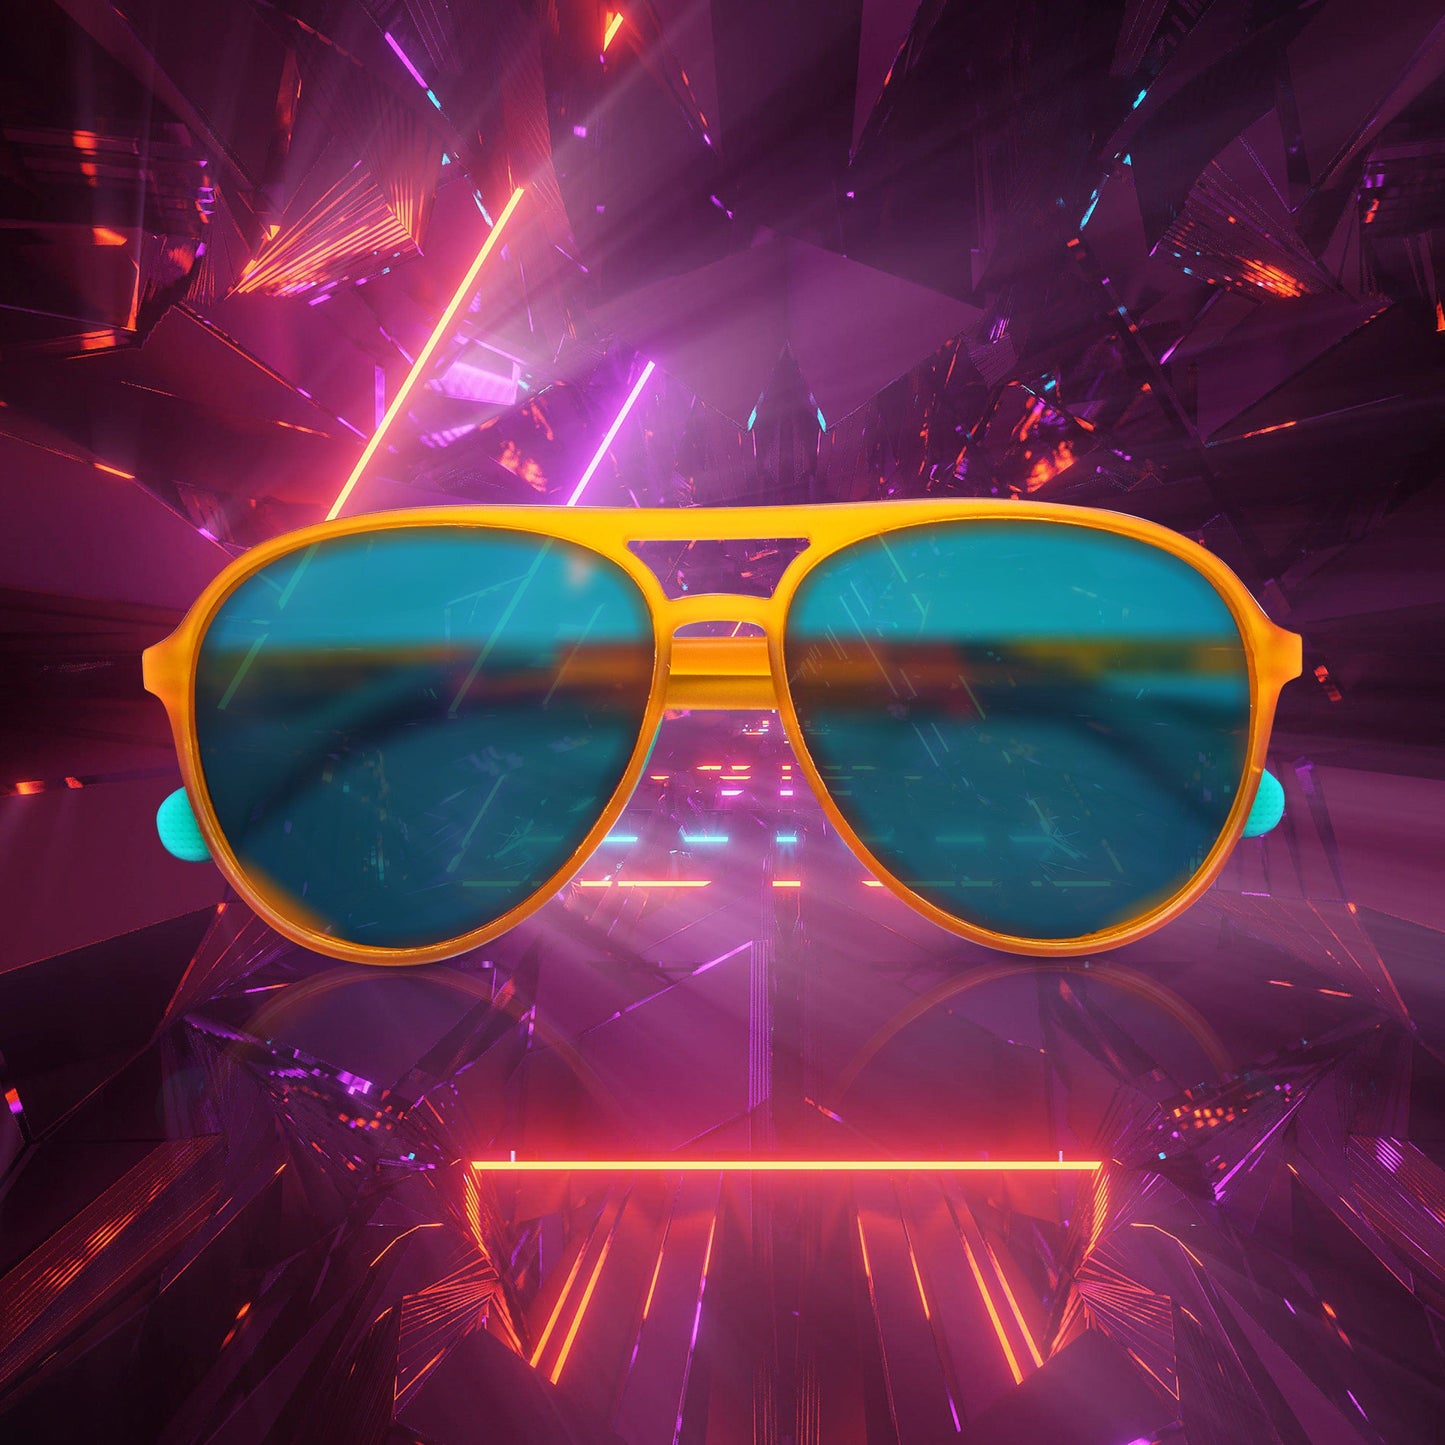 Heartbeat Lyfe Trippy Glasses for Raves